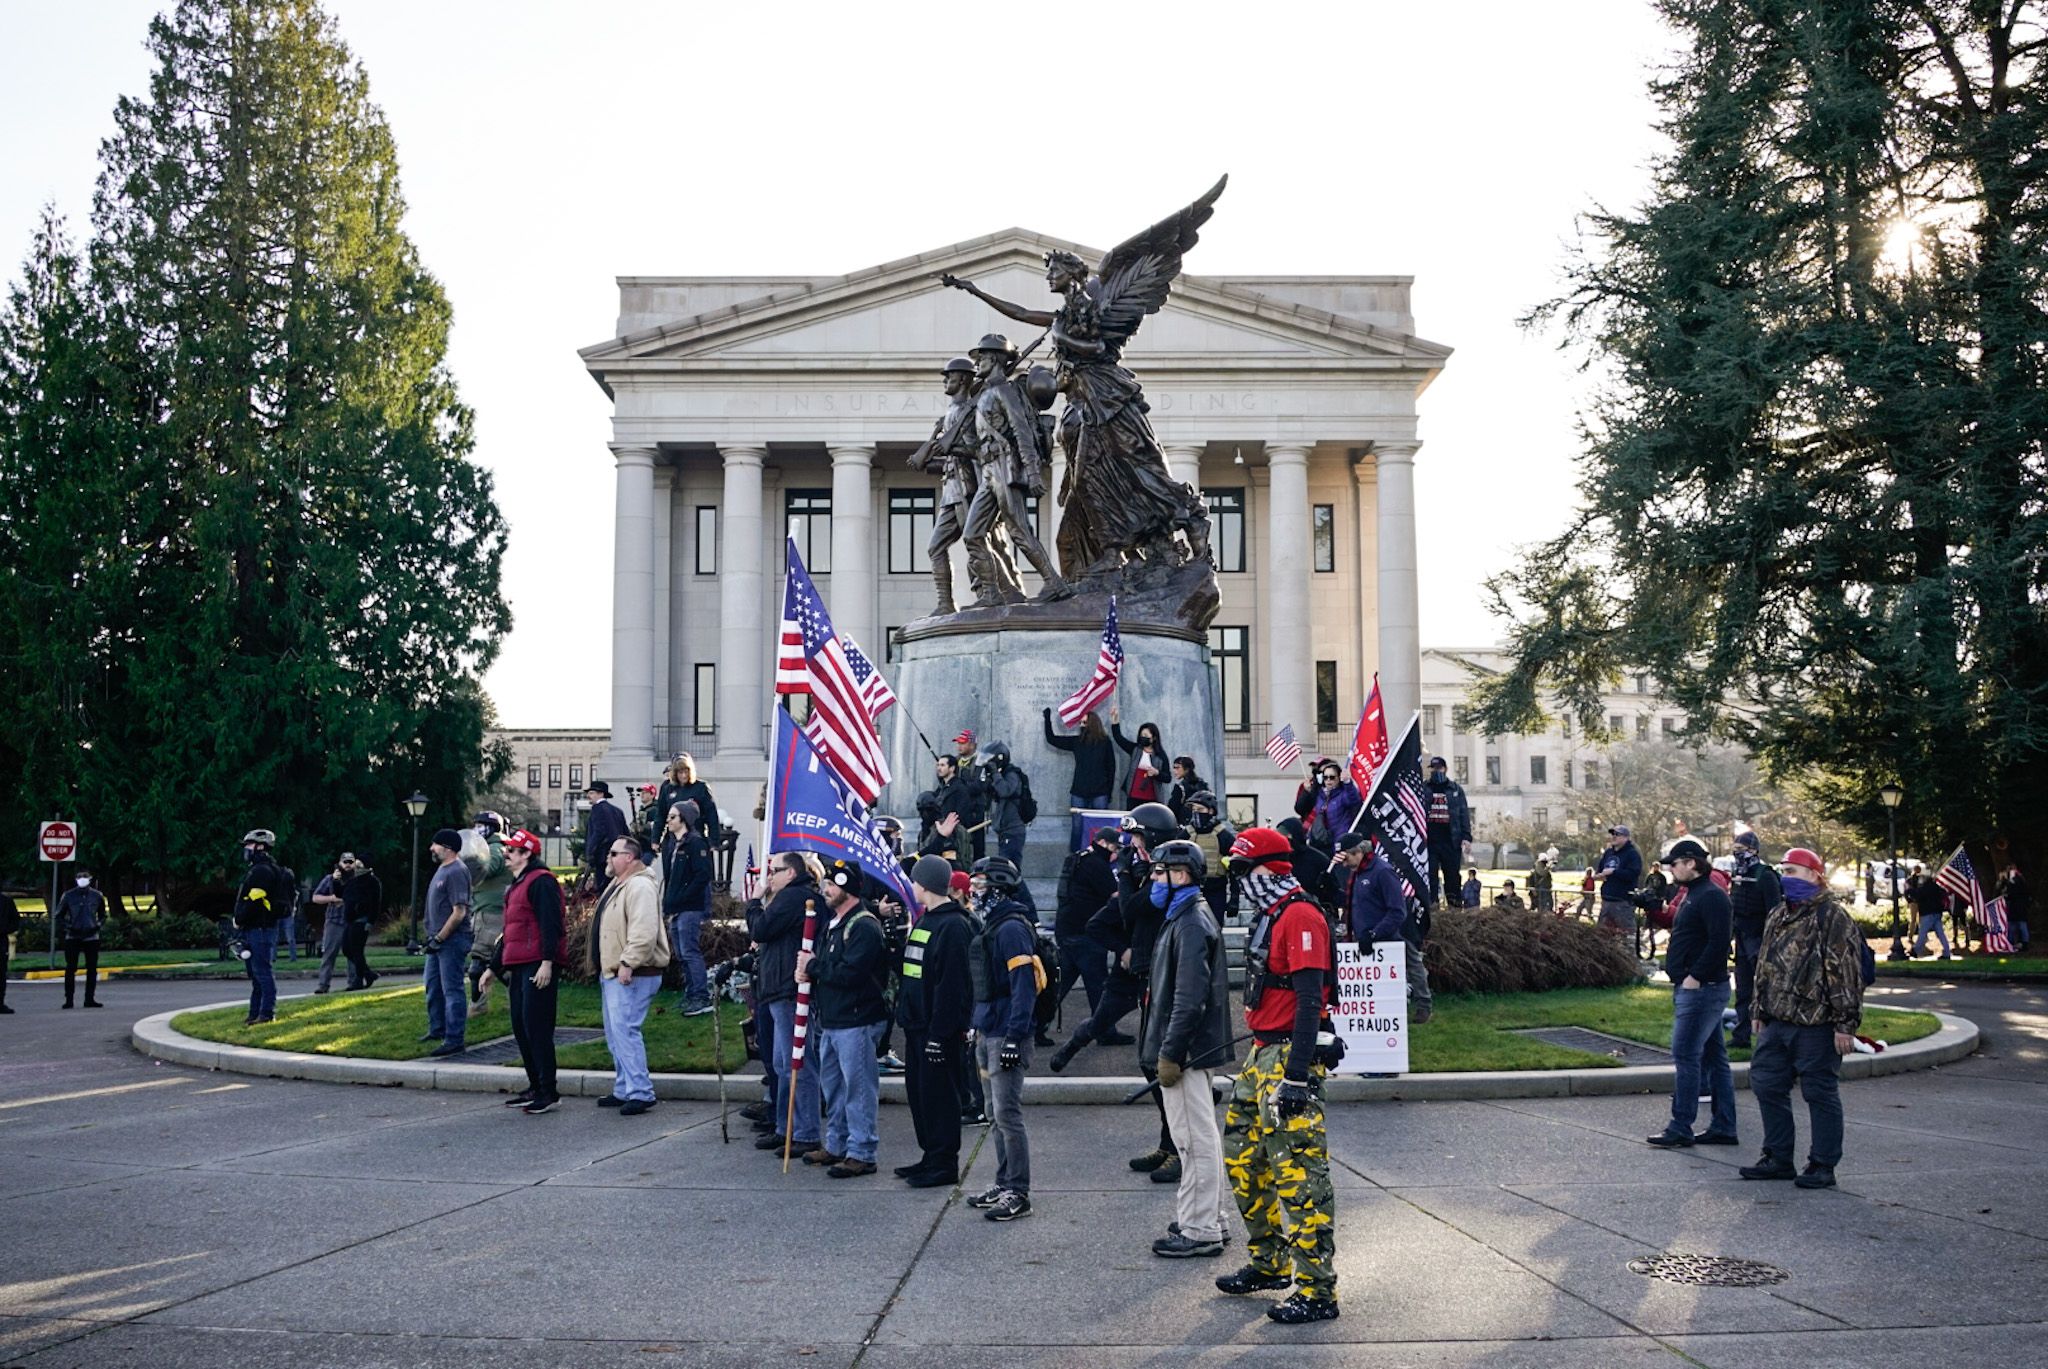 Trump supporters taunt counter-protesters during political clashes on December 12, 2020 in Olympia, Washington. 